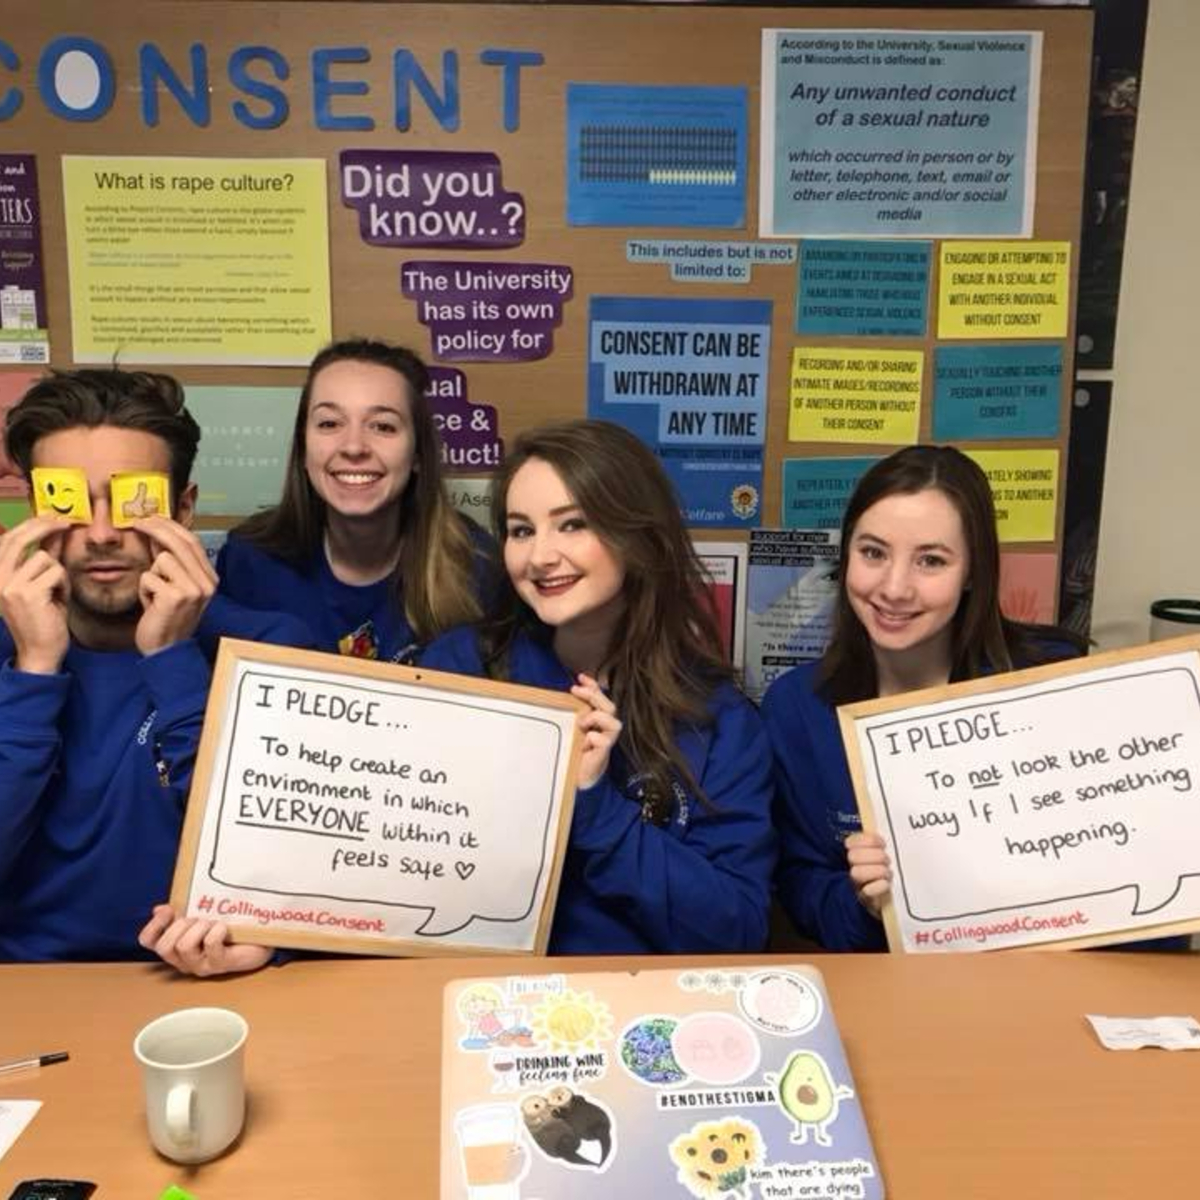 TStudents behind table holding consent campaign posters